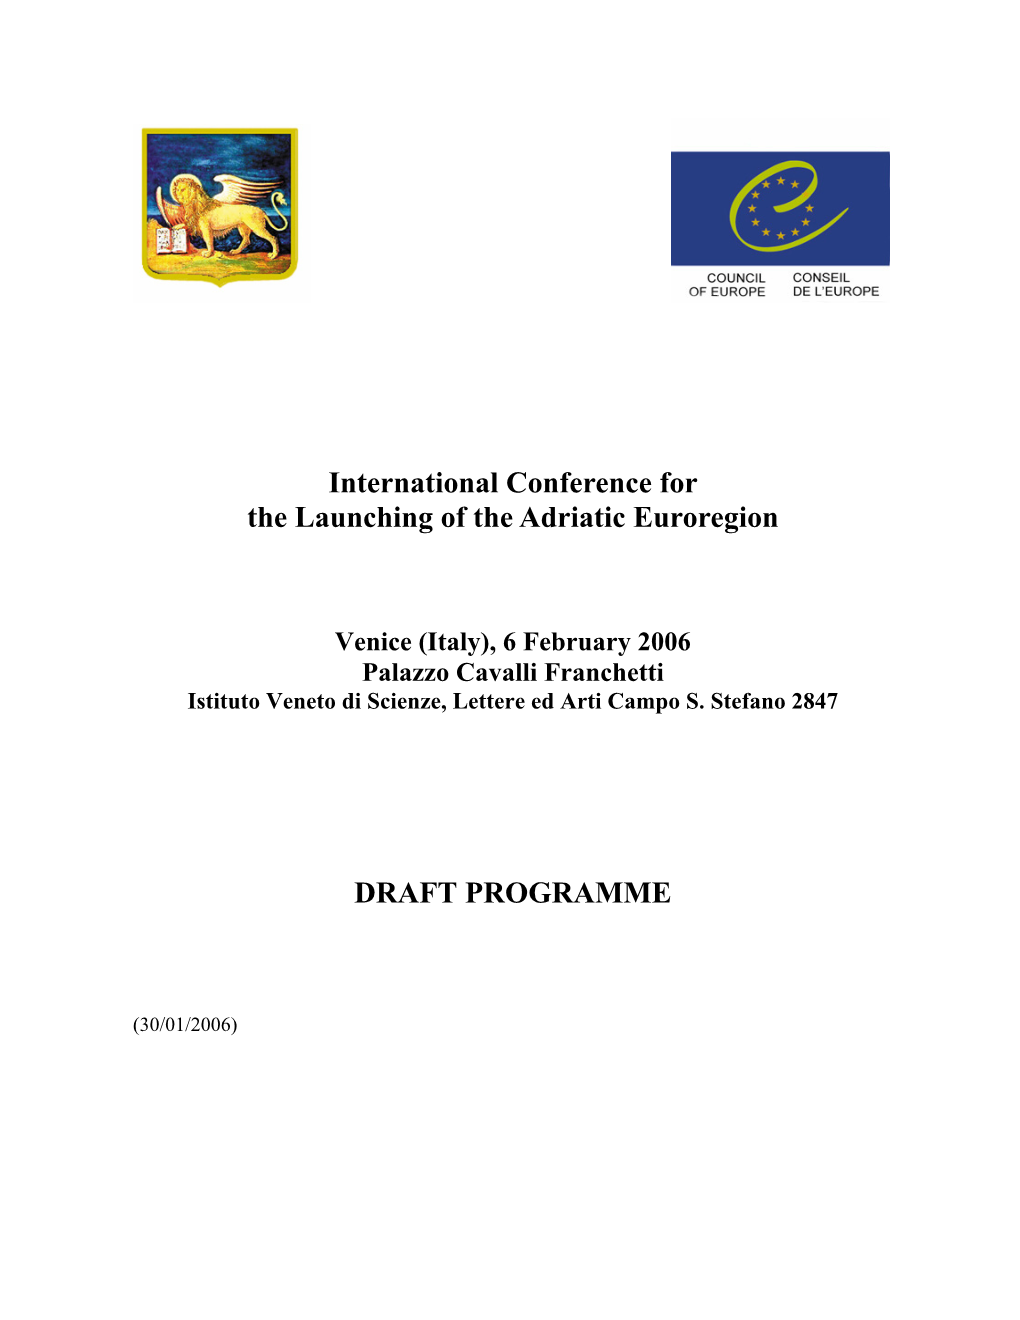 International Conference for the Launching of the Adriatic Euroregion DRAFT PROGRAMME